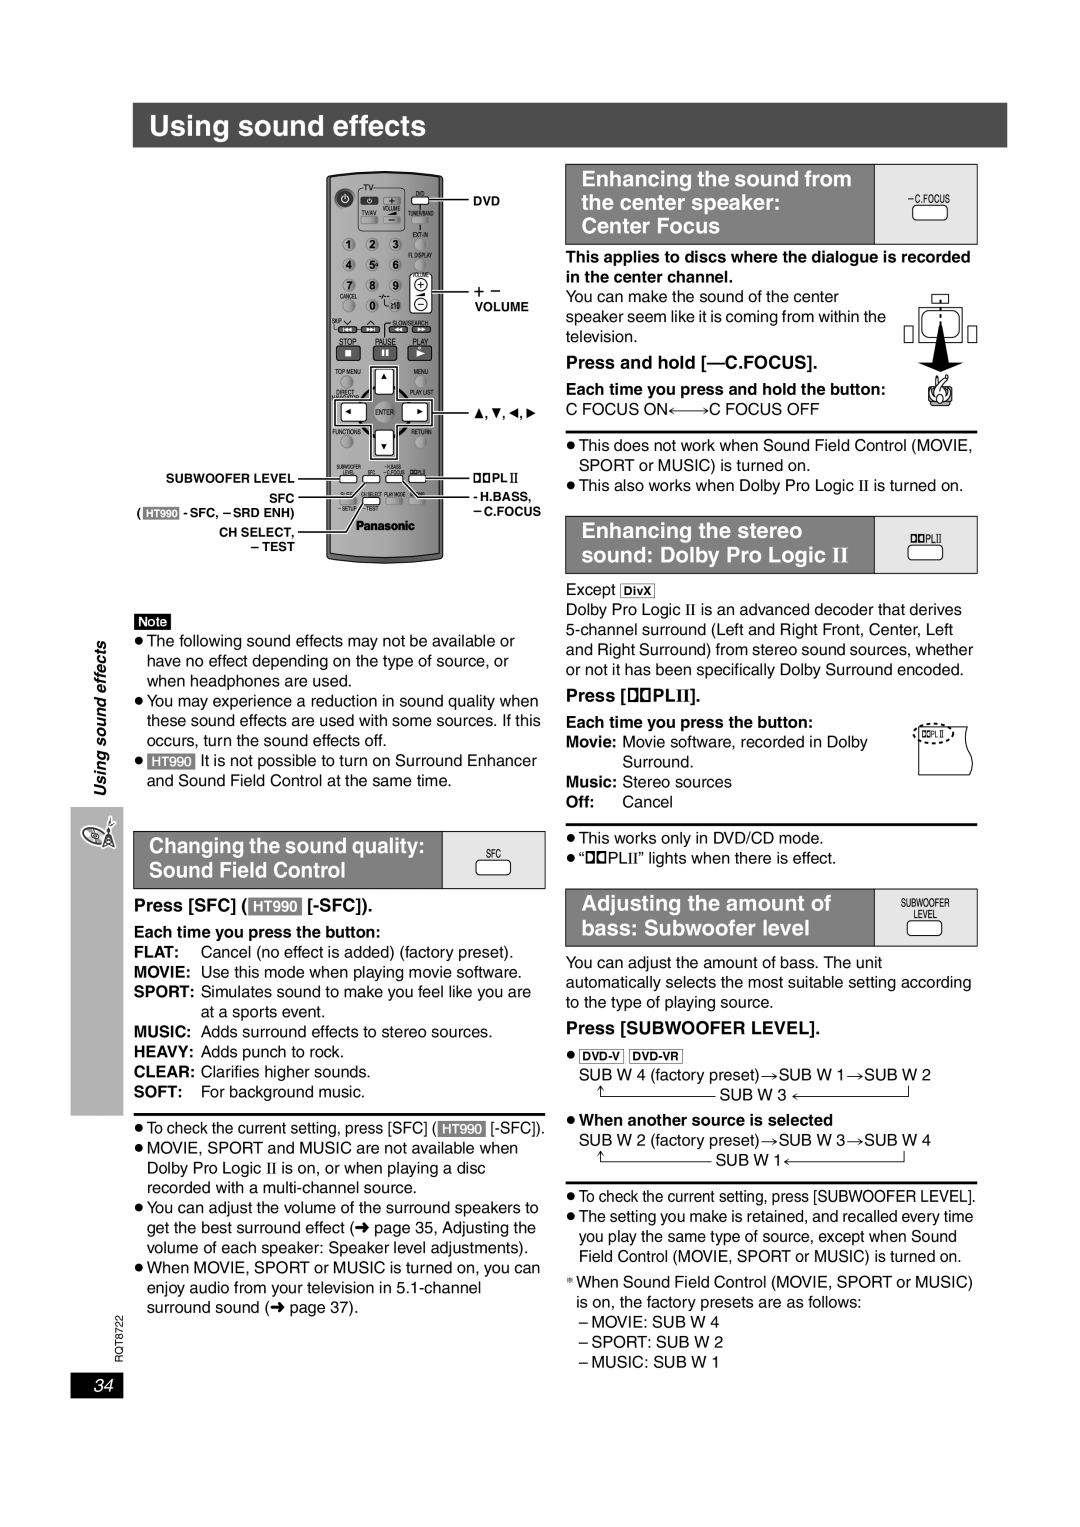 Panasonic SC-HT540 Using sound effects, Changing the sound quality Sound Field Control, Each time you press the button 